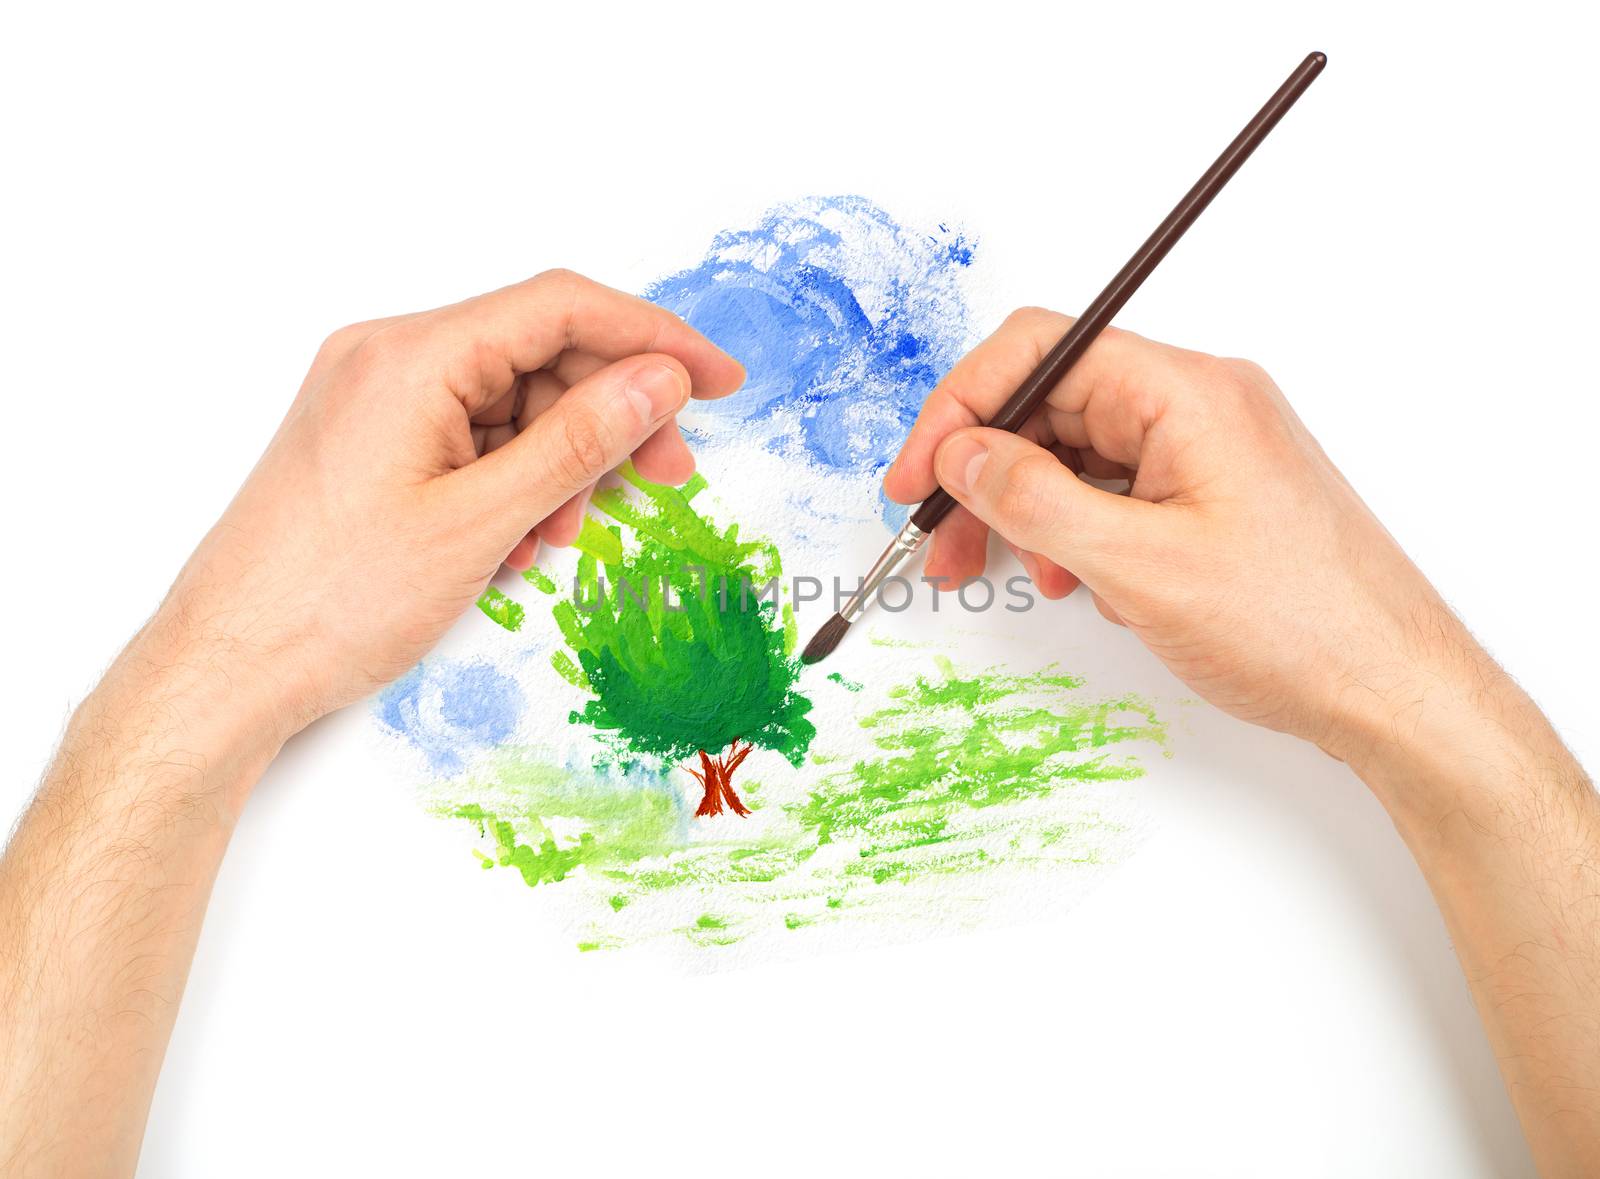 Human hands with brush painting nature landscape on white background